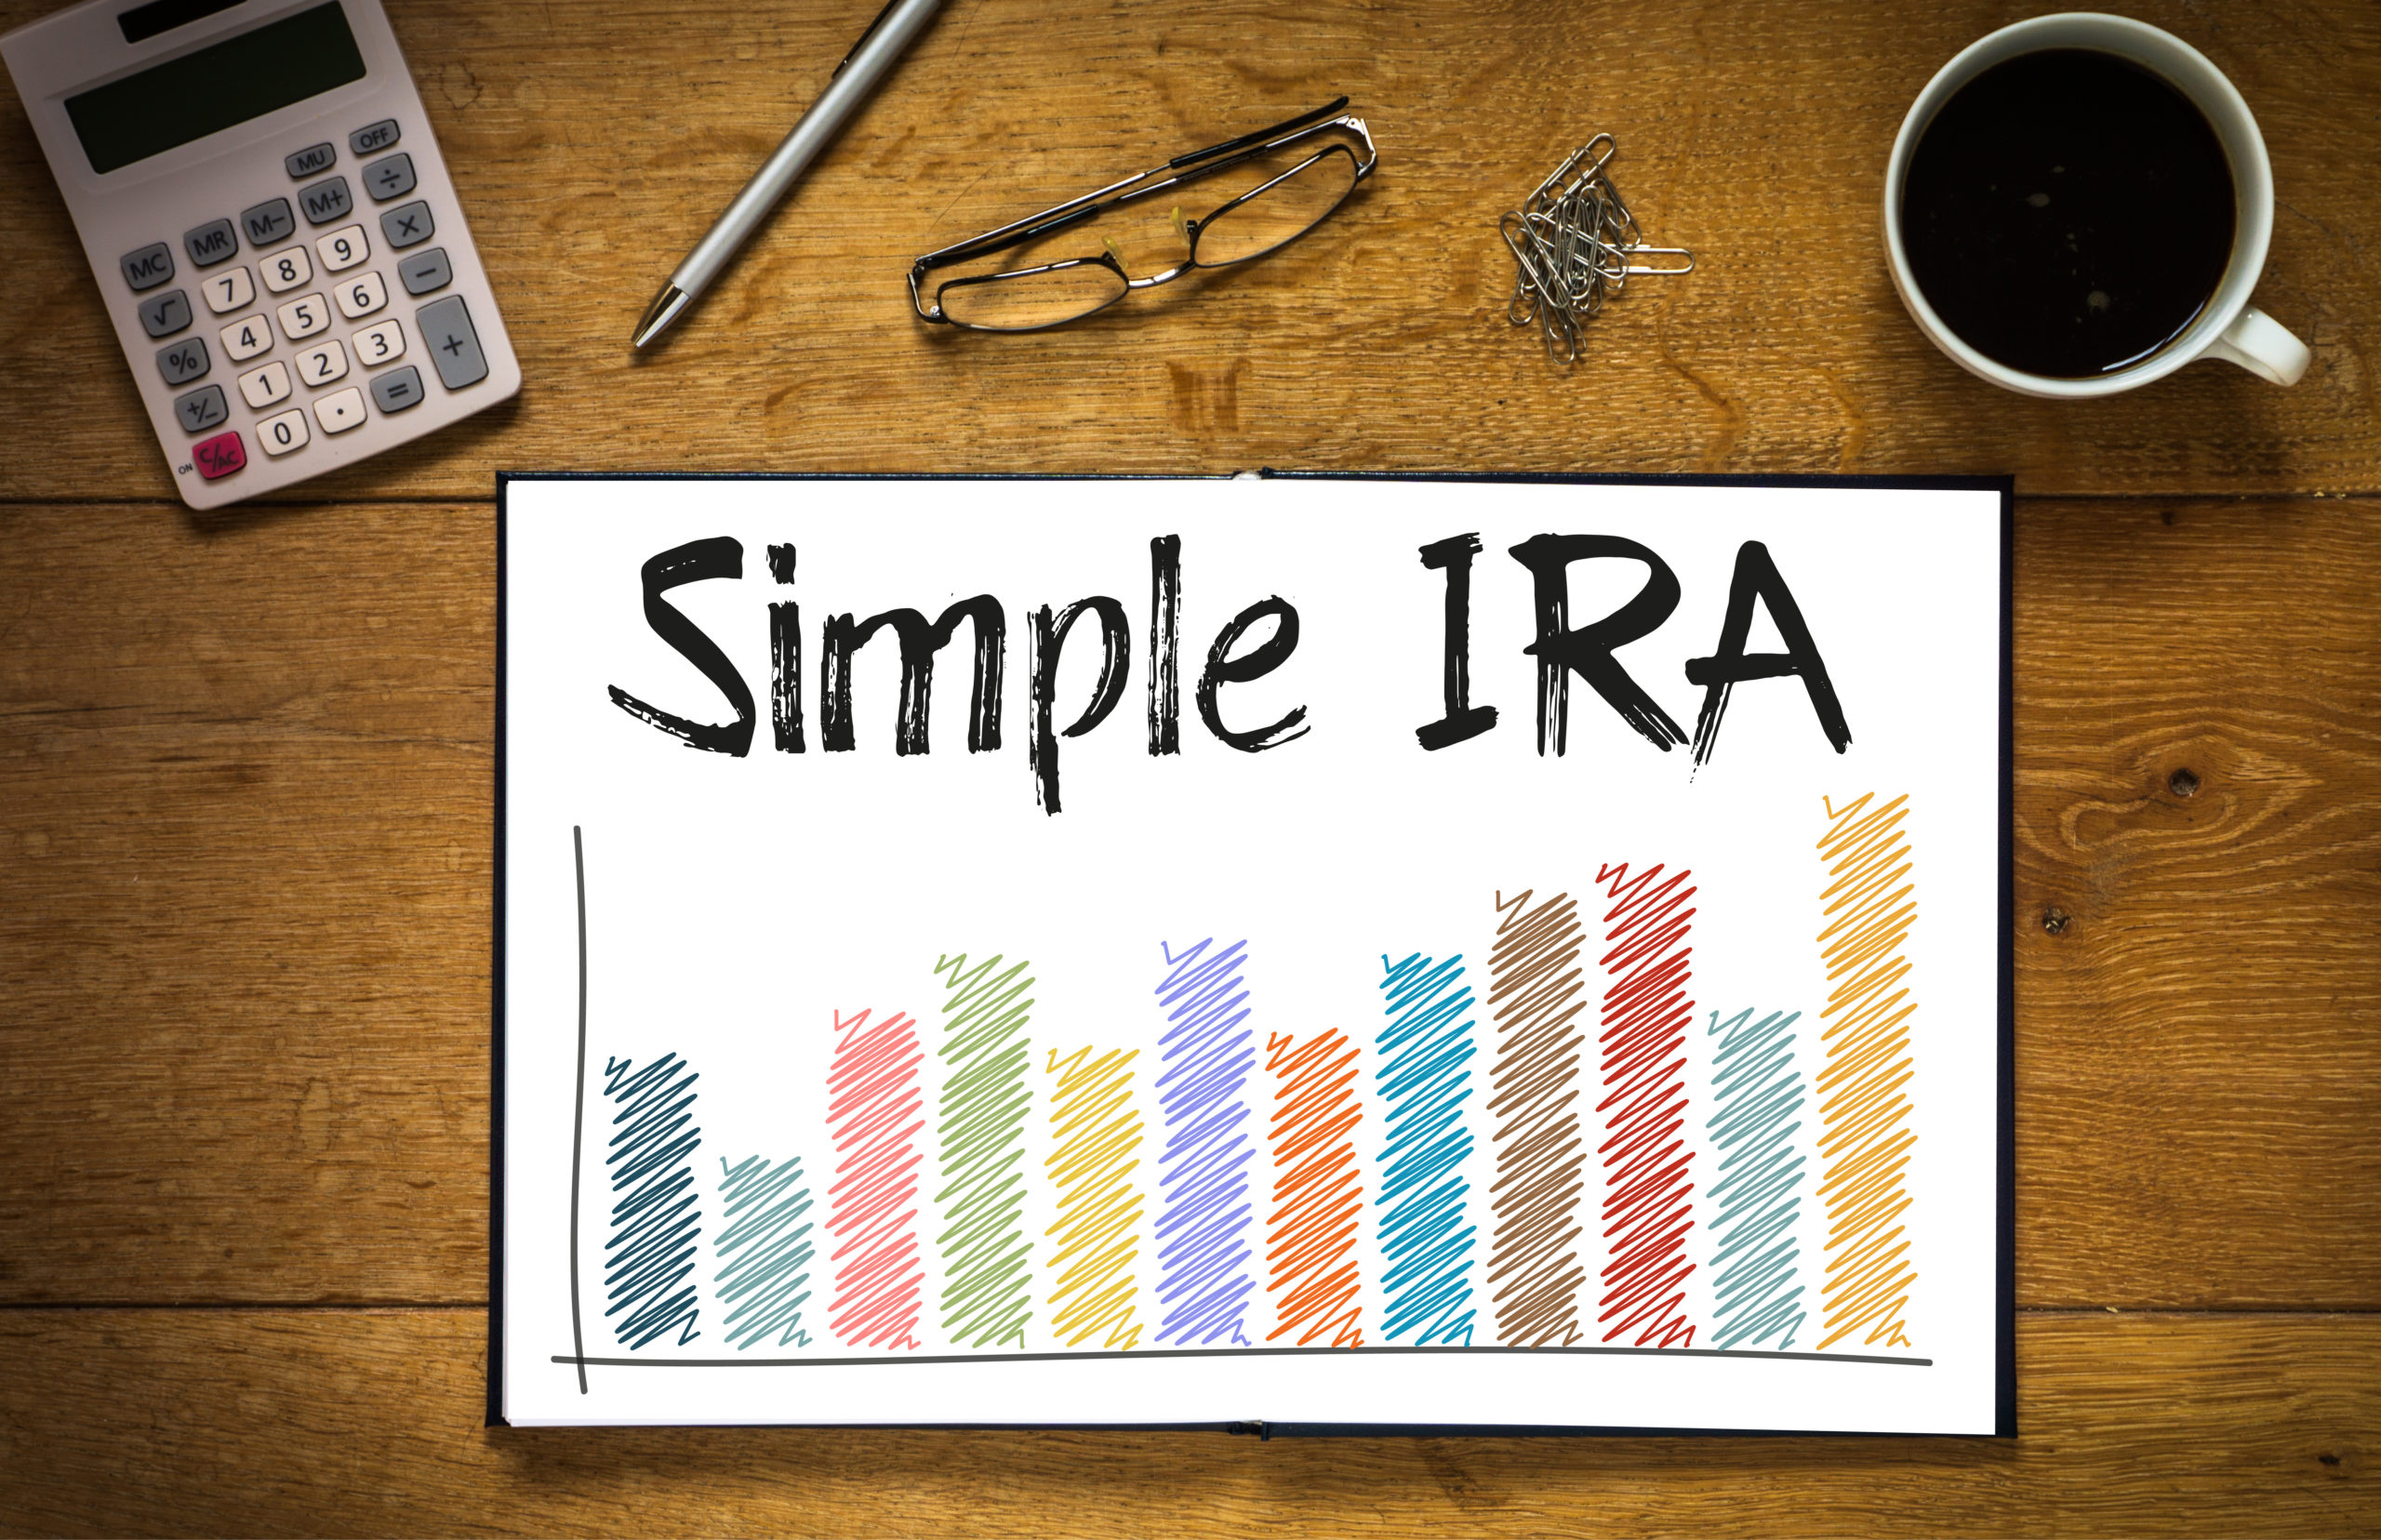 How SIMPLE is a SIMPLE IRA? uDirect IRA Services, LLC